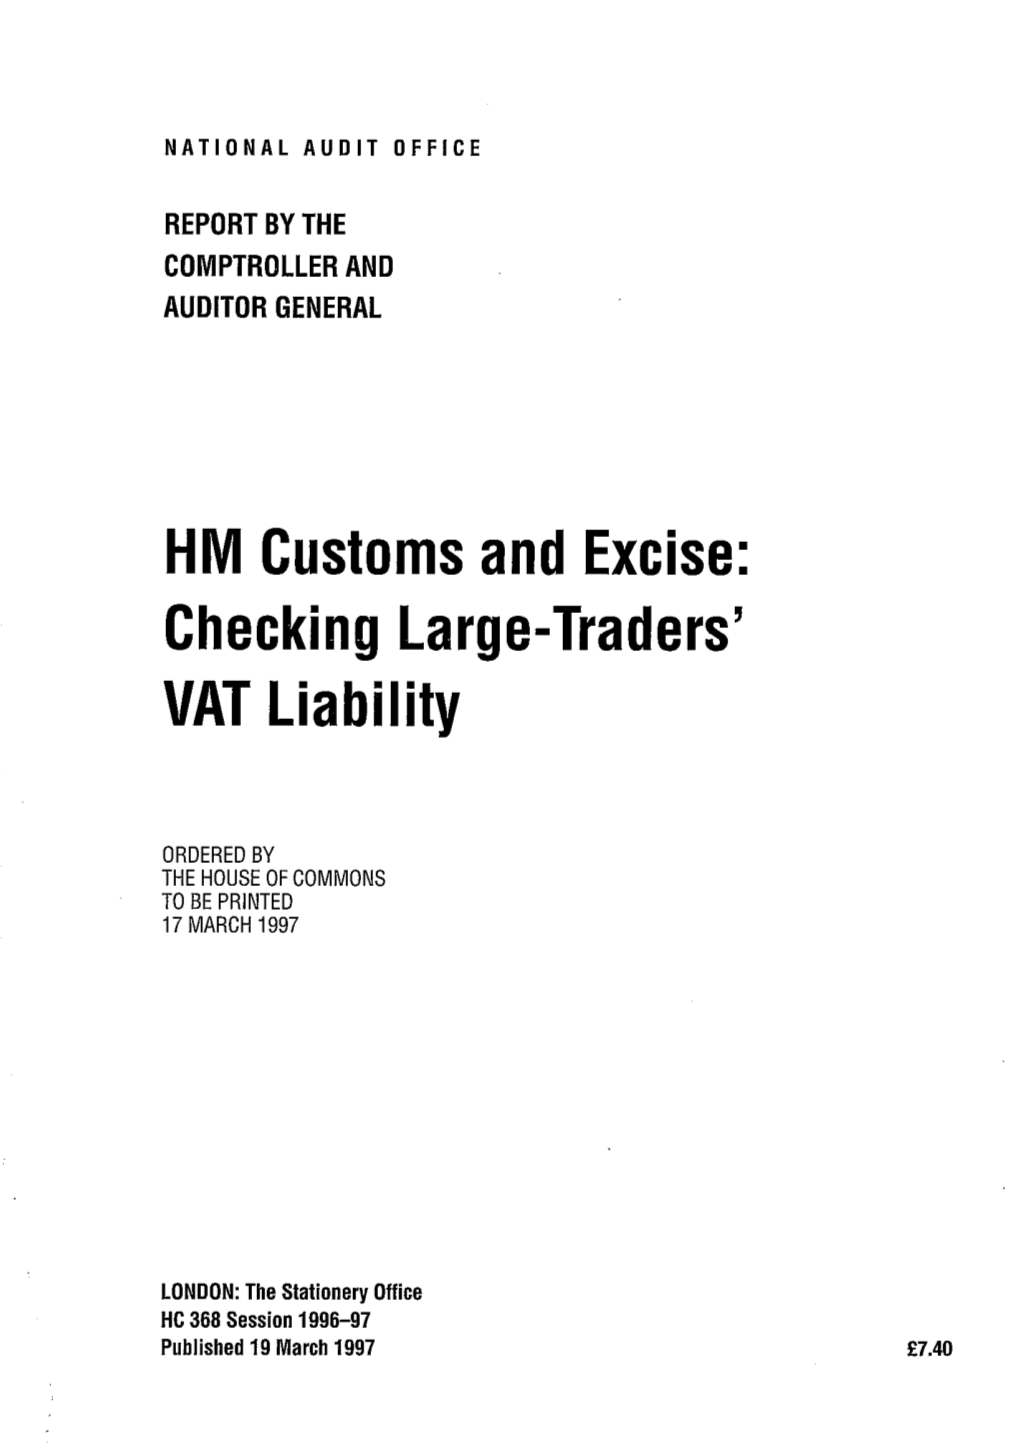 HM Customs and Excise: Checking Large-Traders’ VAT Liability